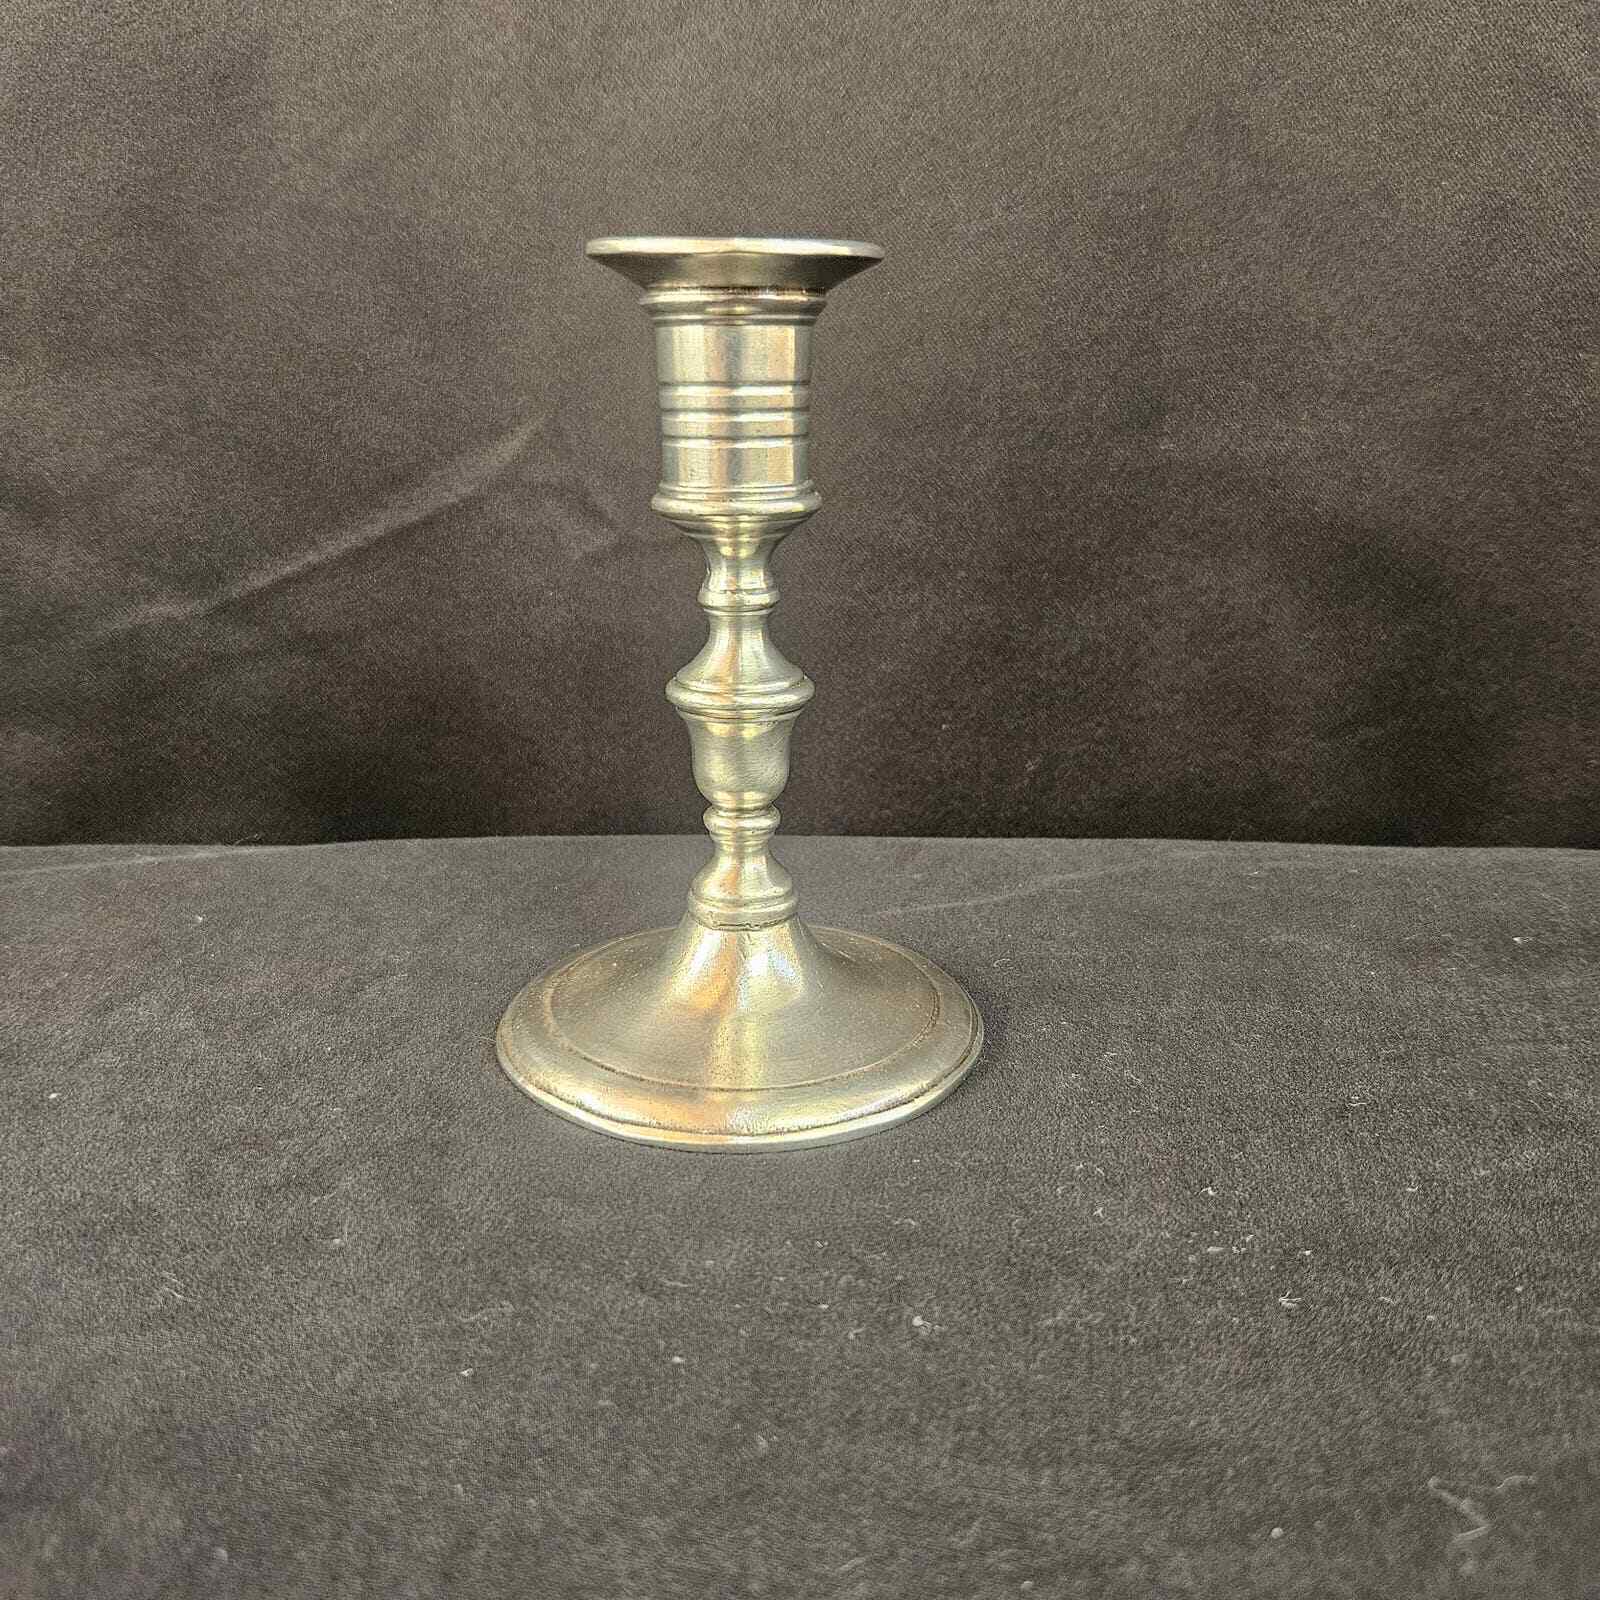 Match Pewter Prato Candlestick Made in Italy Signed 5.1